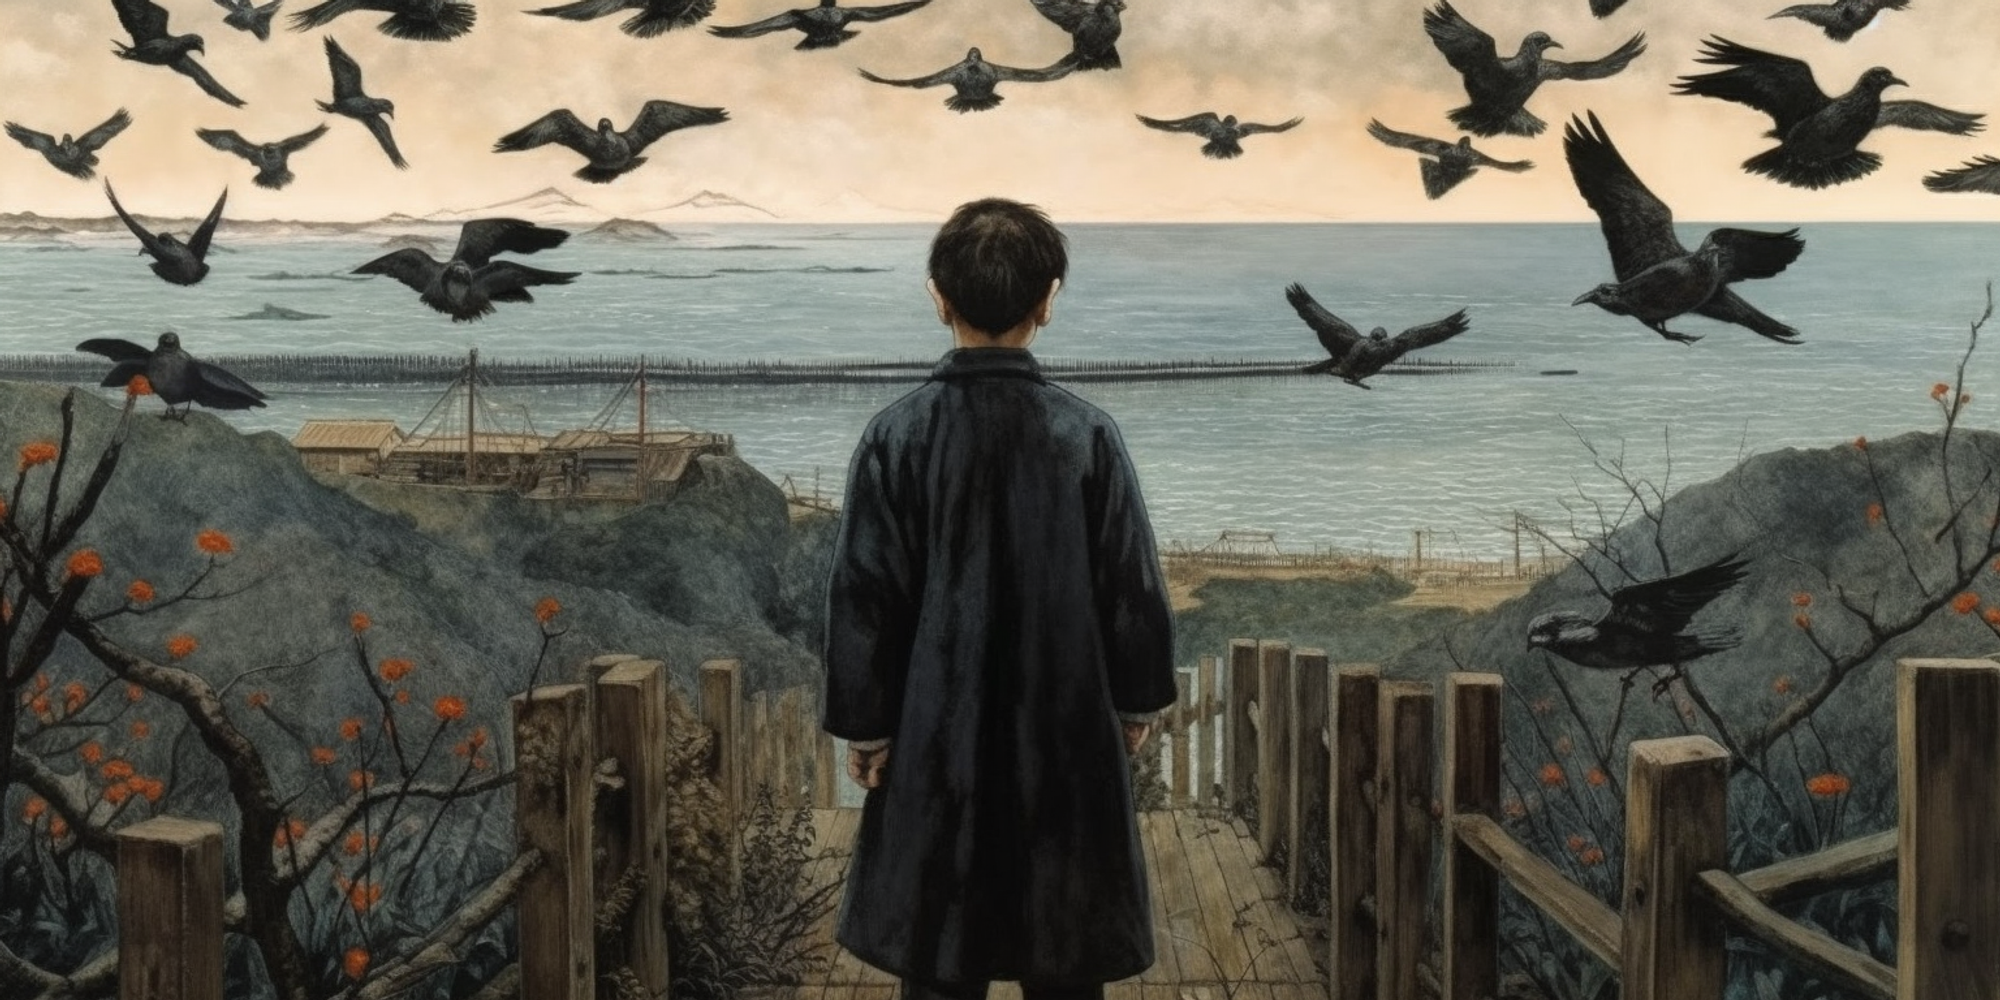 moodyanna_Kafka_by_the_seaside_a_Japanese_boy_with_crows_perche_d10beb49-60b6-4d08-9e42-d260329a0e31.png